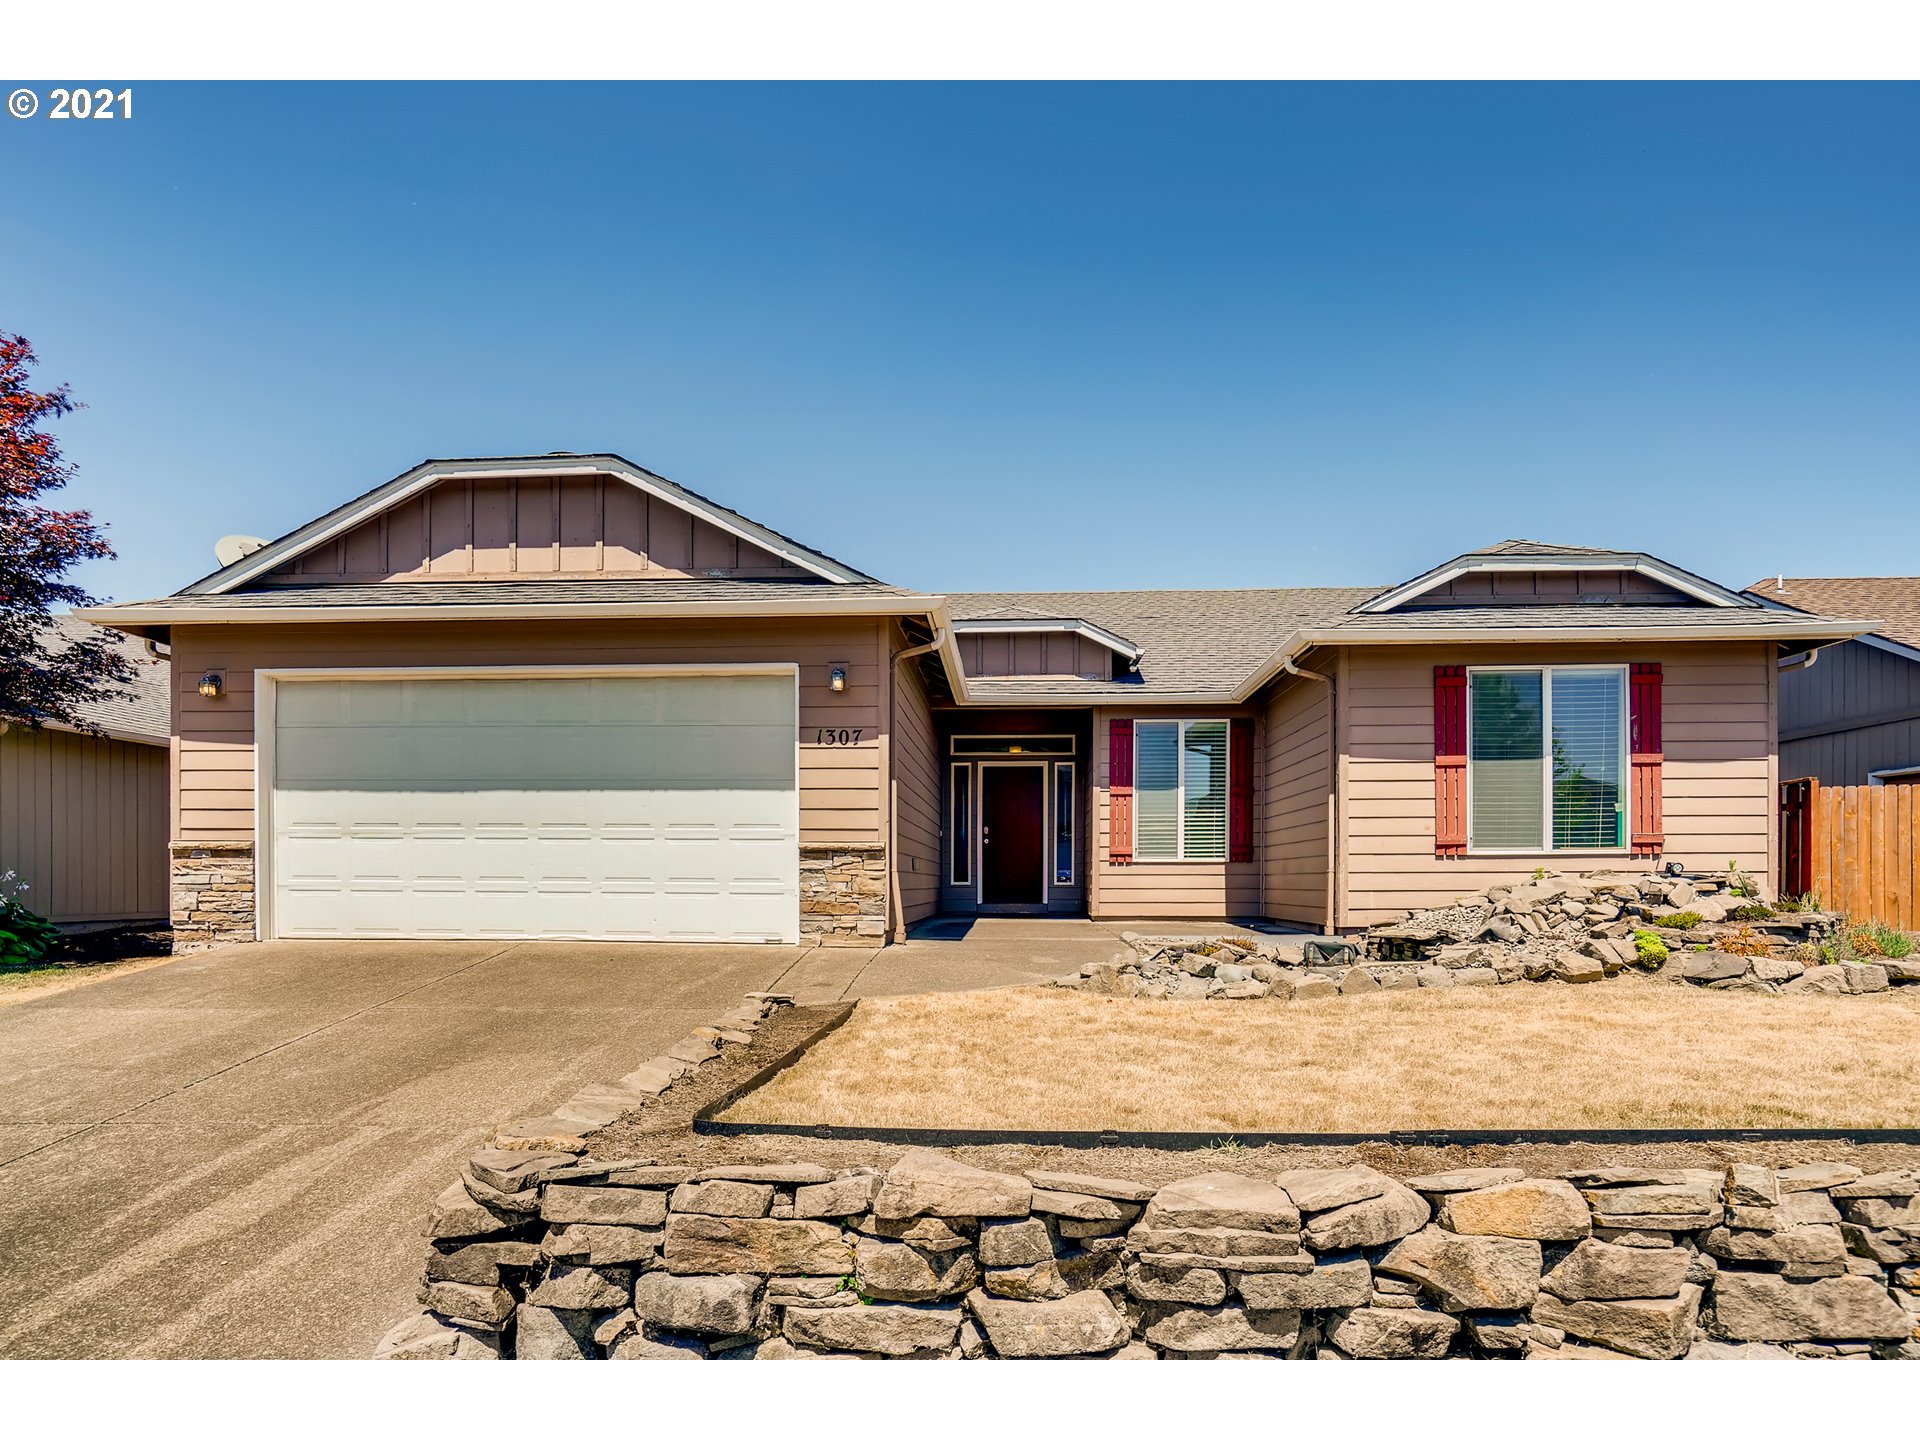 1307 MT VIEW LN (1 of 32)